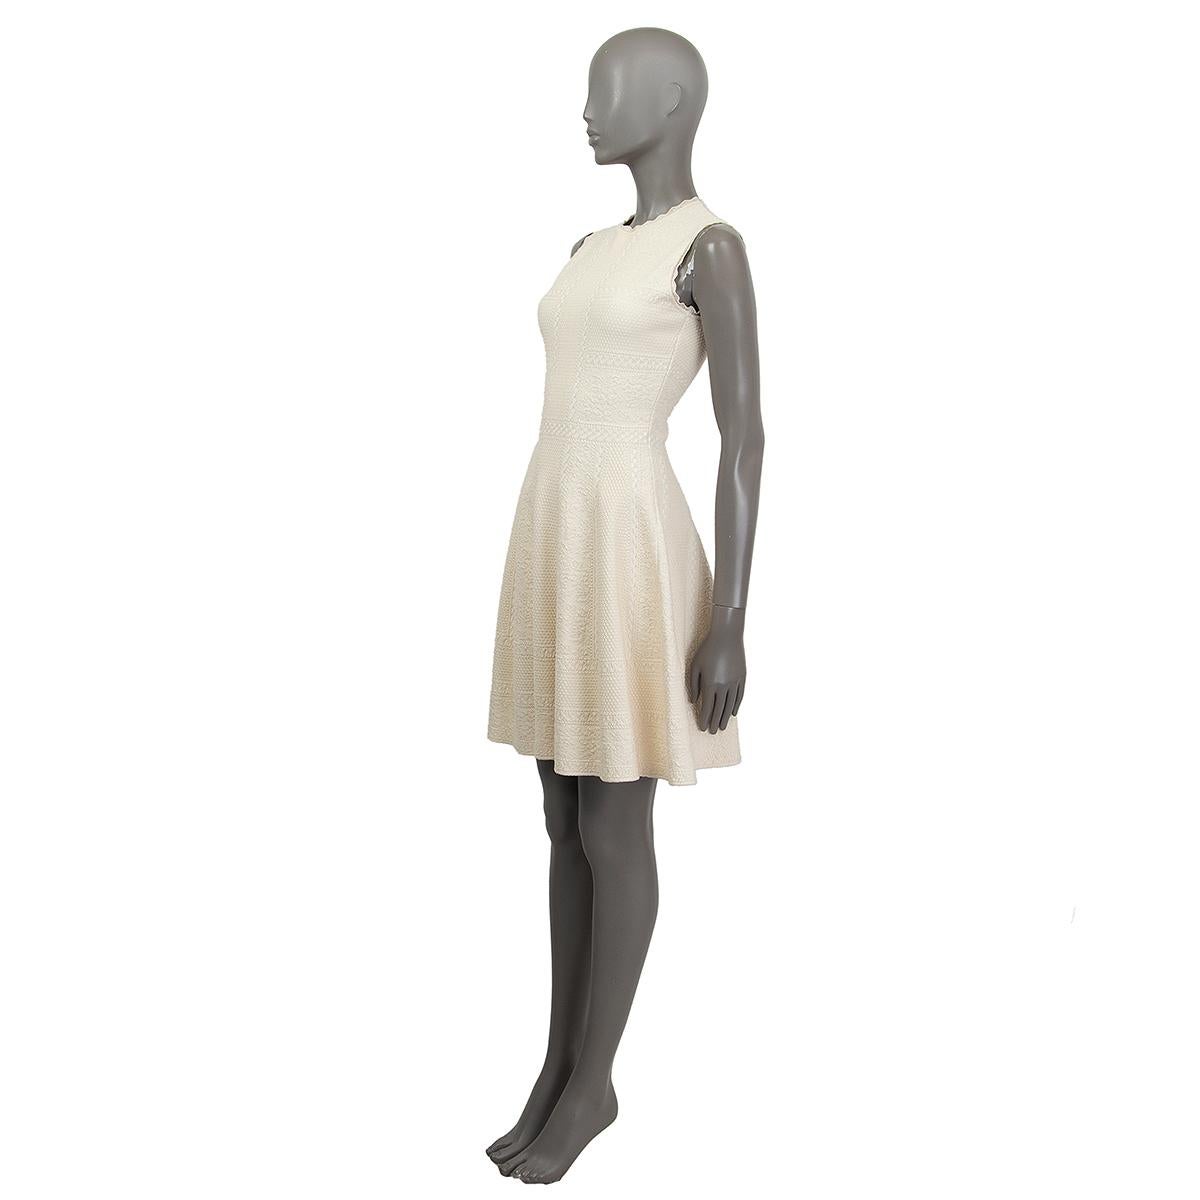 Alexander McQueen sleeveless jacquard knit dress in cream and white viscose (54%), silk (35%) and polyester (11%). Has scallopped knit neckline and arm openings, flared skirt. Has been worn and is in excellent condition.

Tag Size S
Size S
Bust 78cm